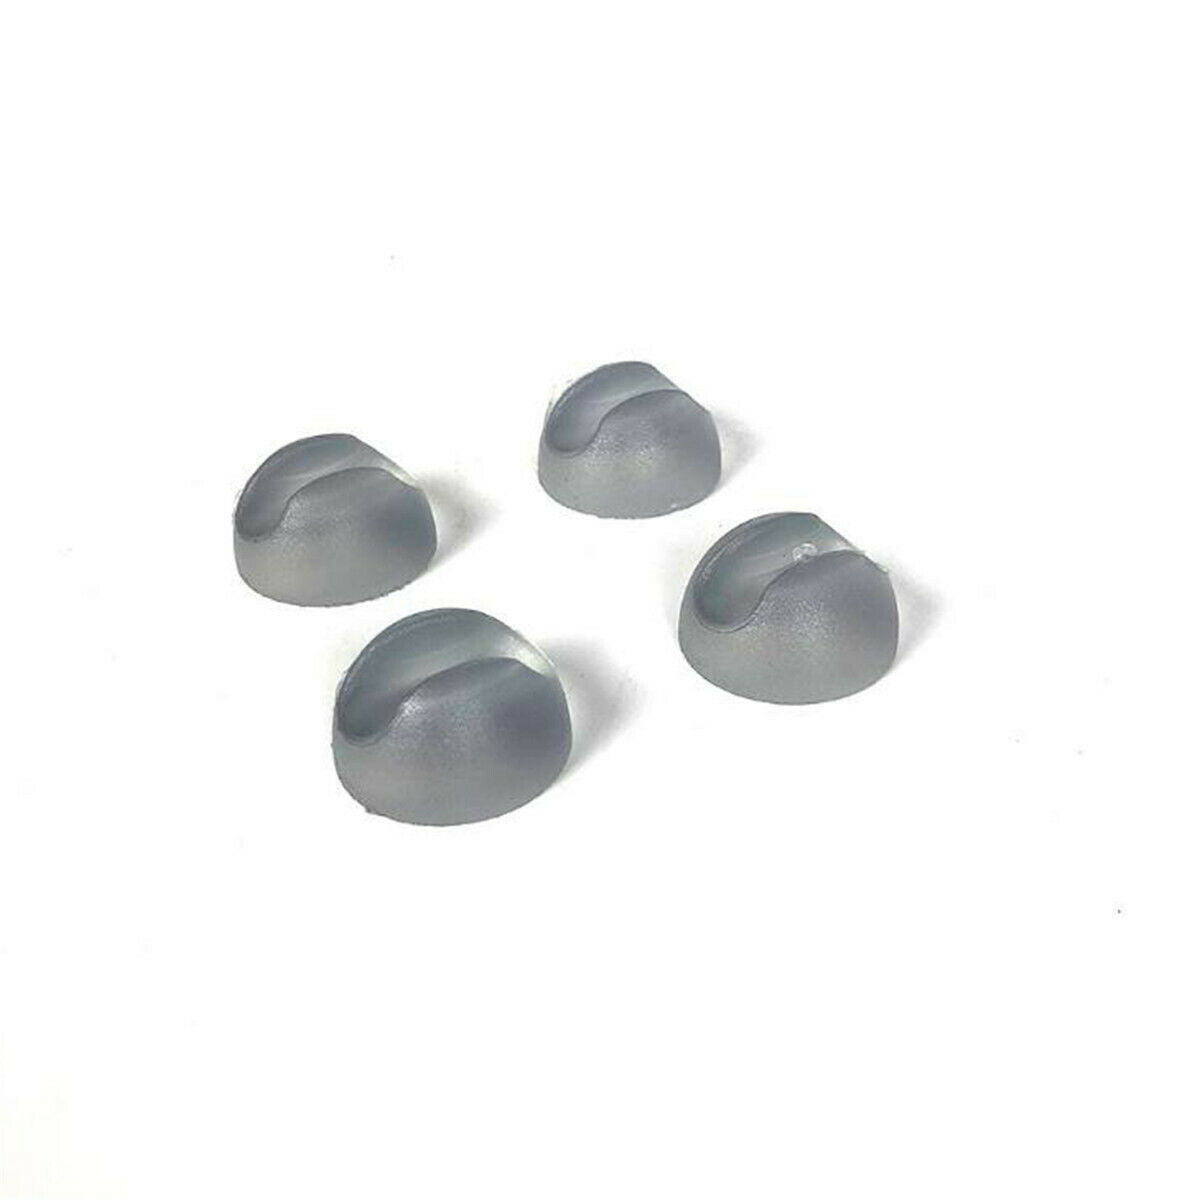 8pcs Hairpin Table Leg Floor Protector Feet Glide Tips Clear Rubber Protectors